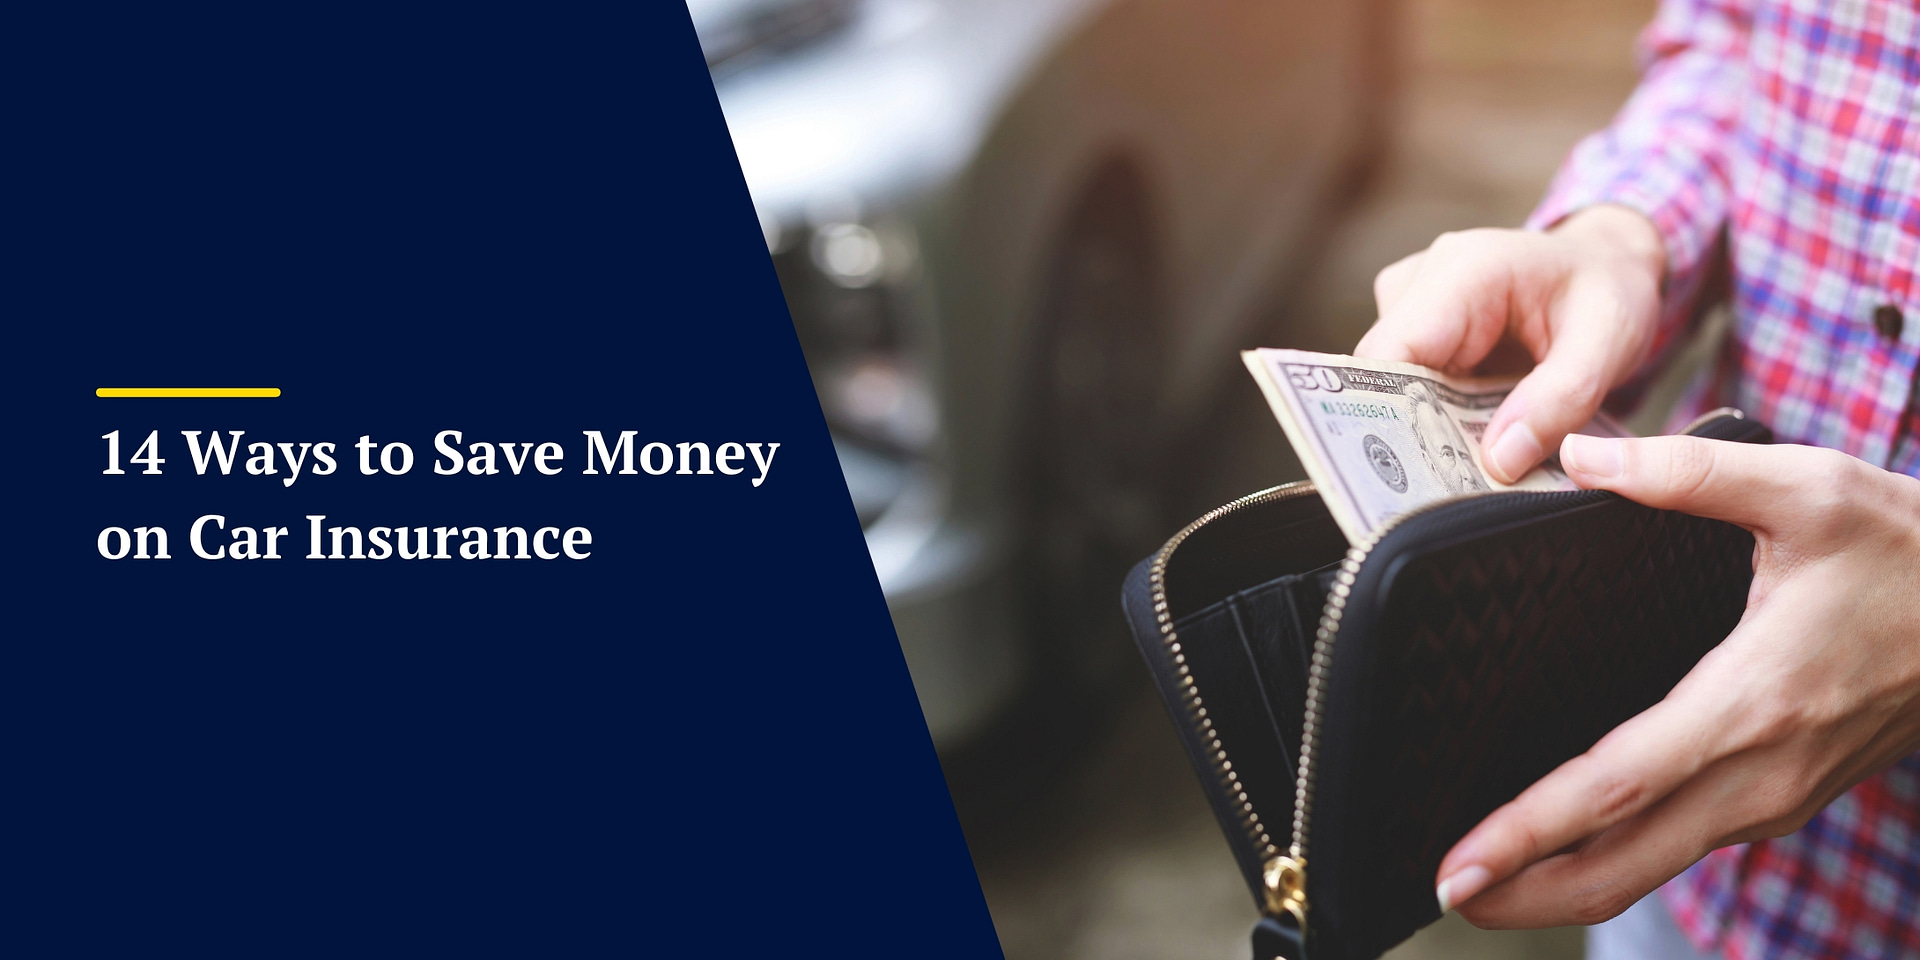 14 Ways to Save Money on Car Insurance